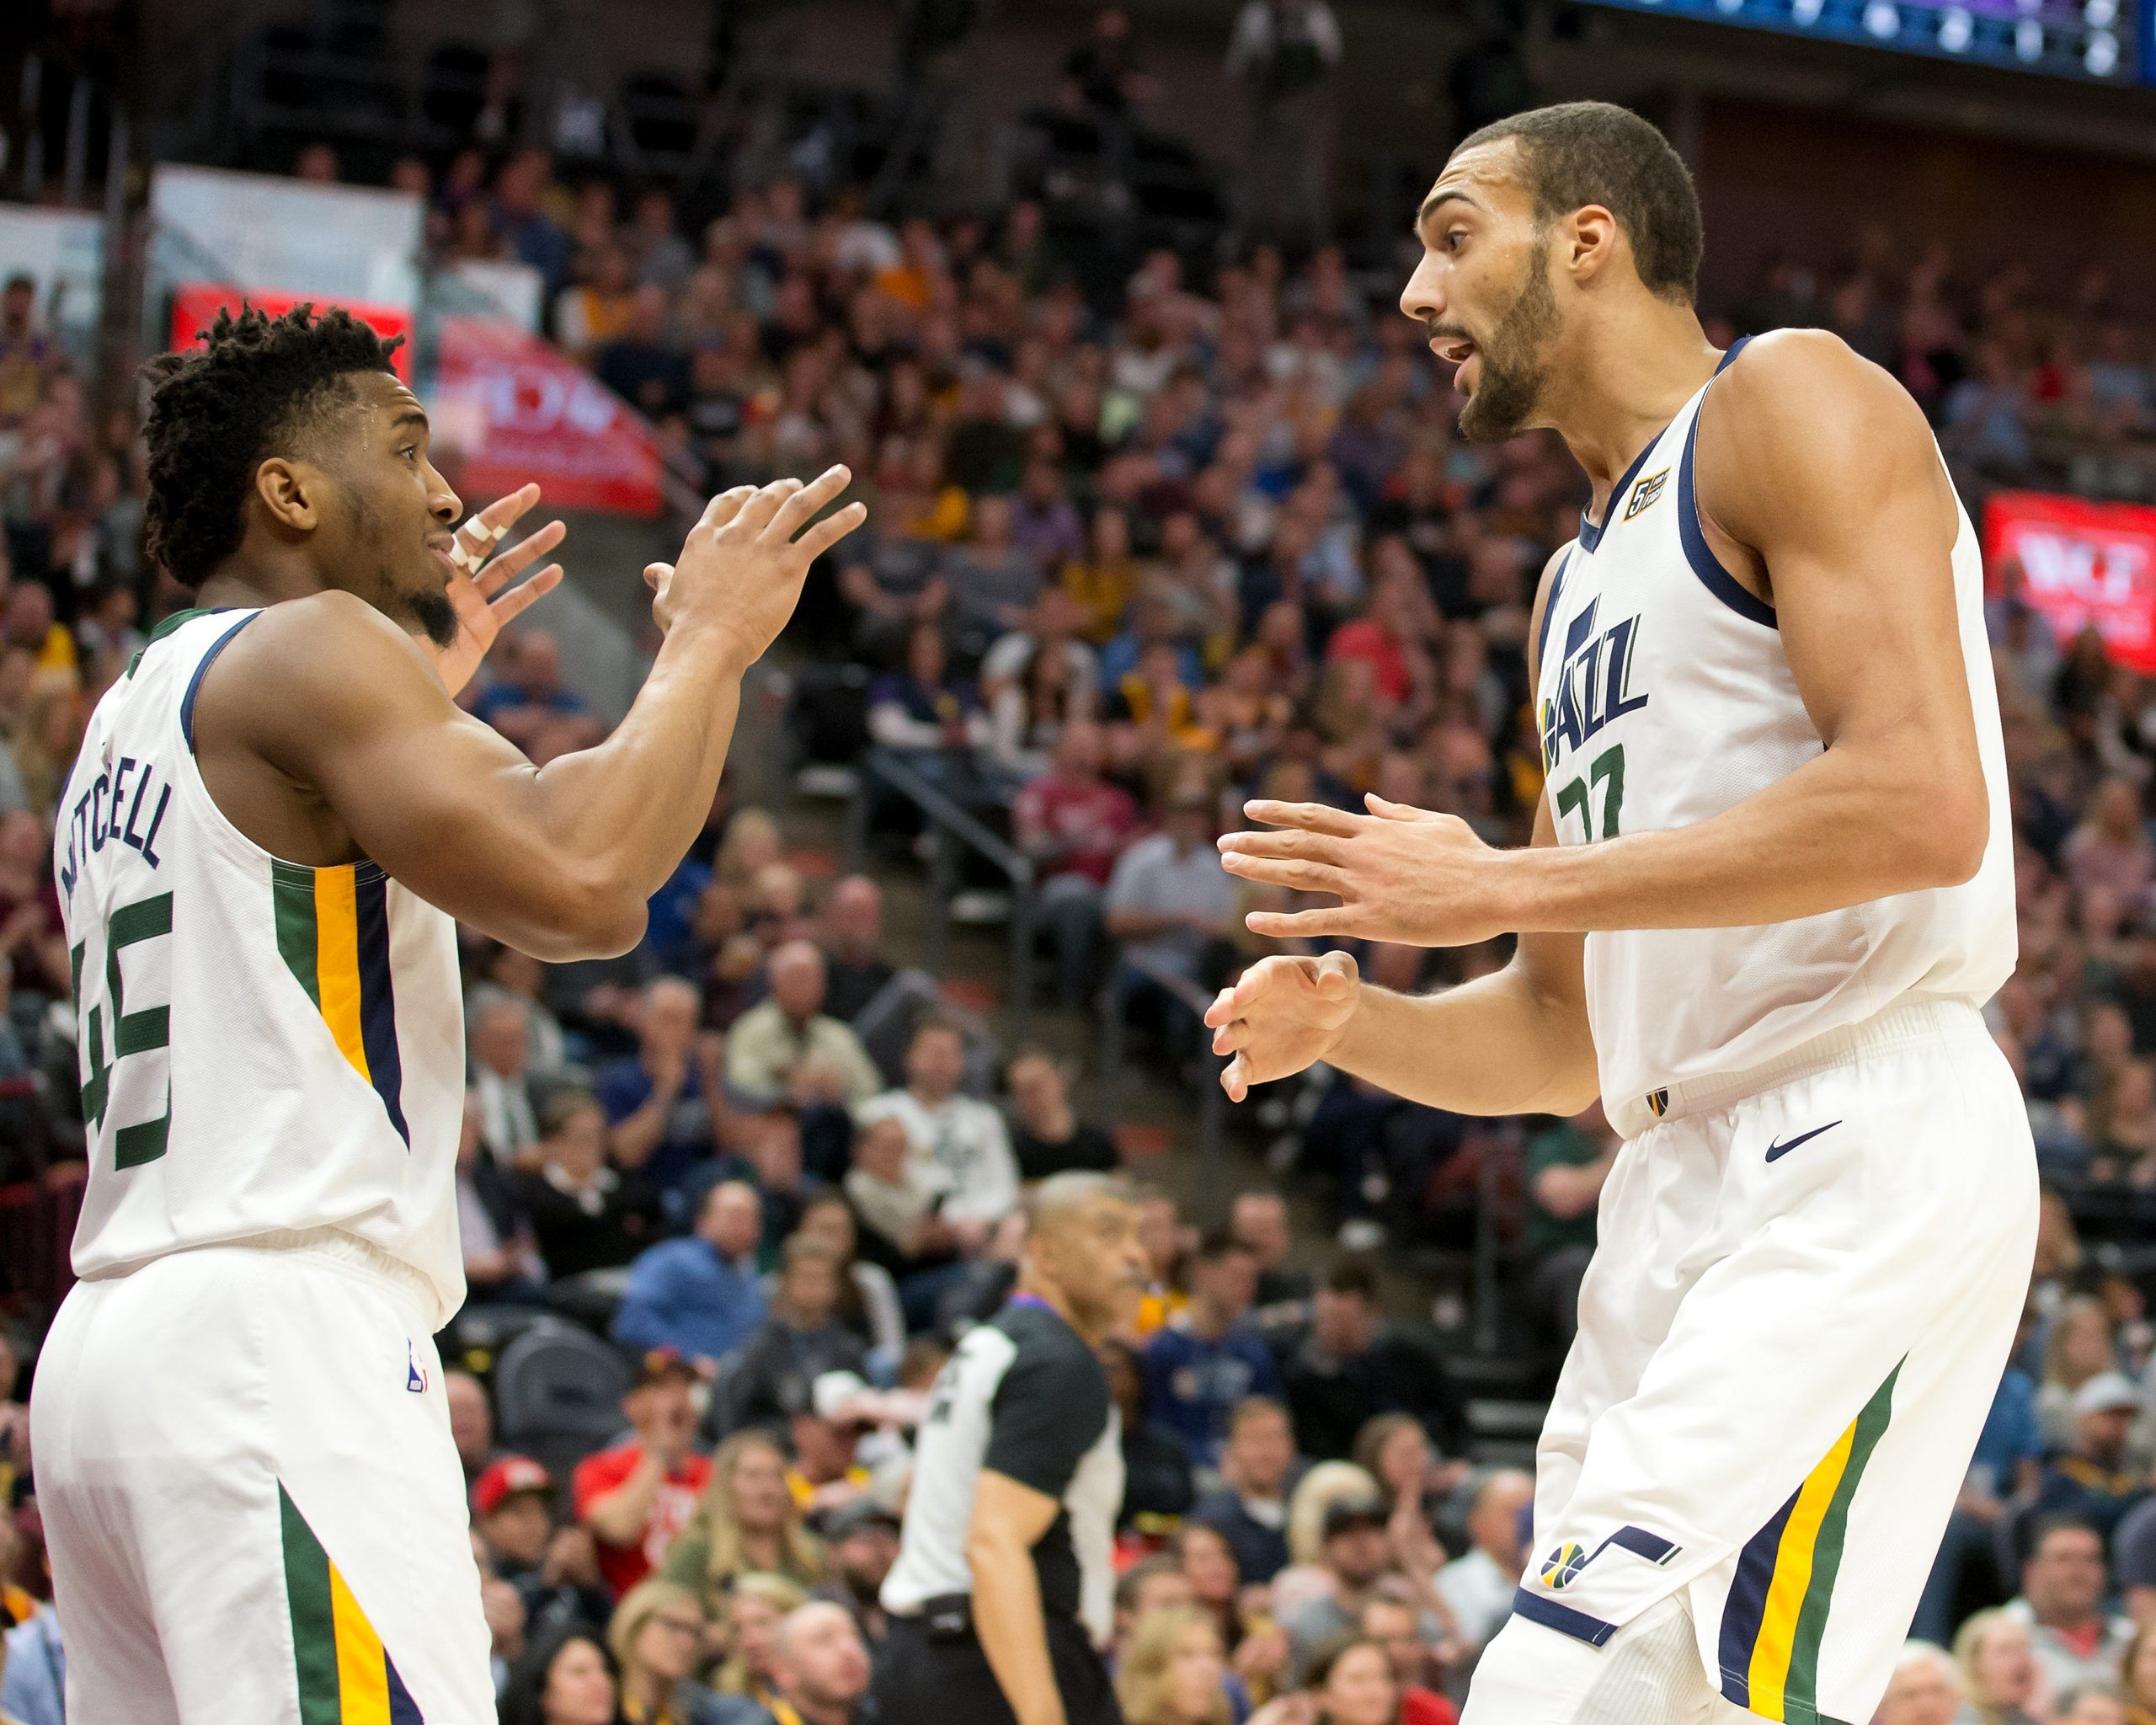 Could Donovan Mitchell, Rudy Gobert unrest help the Knicks?